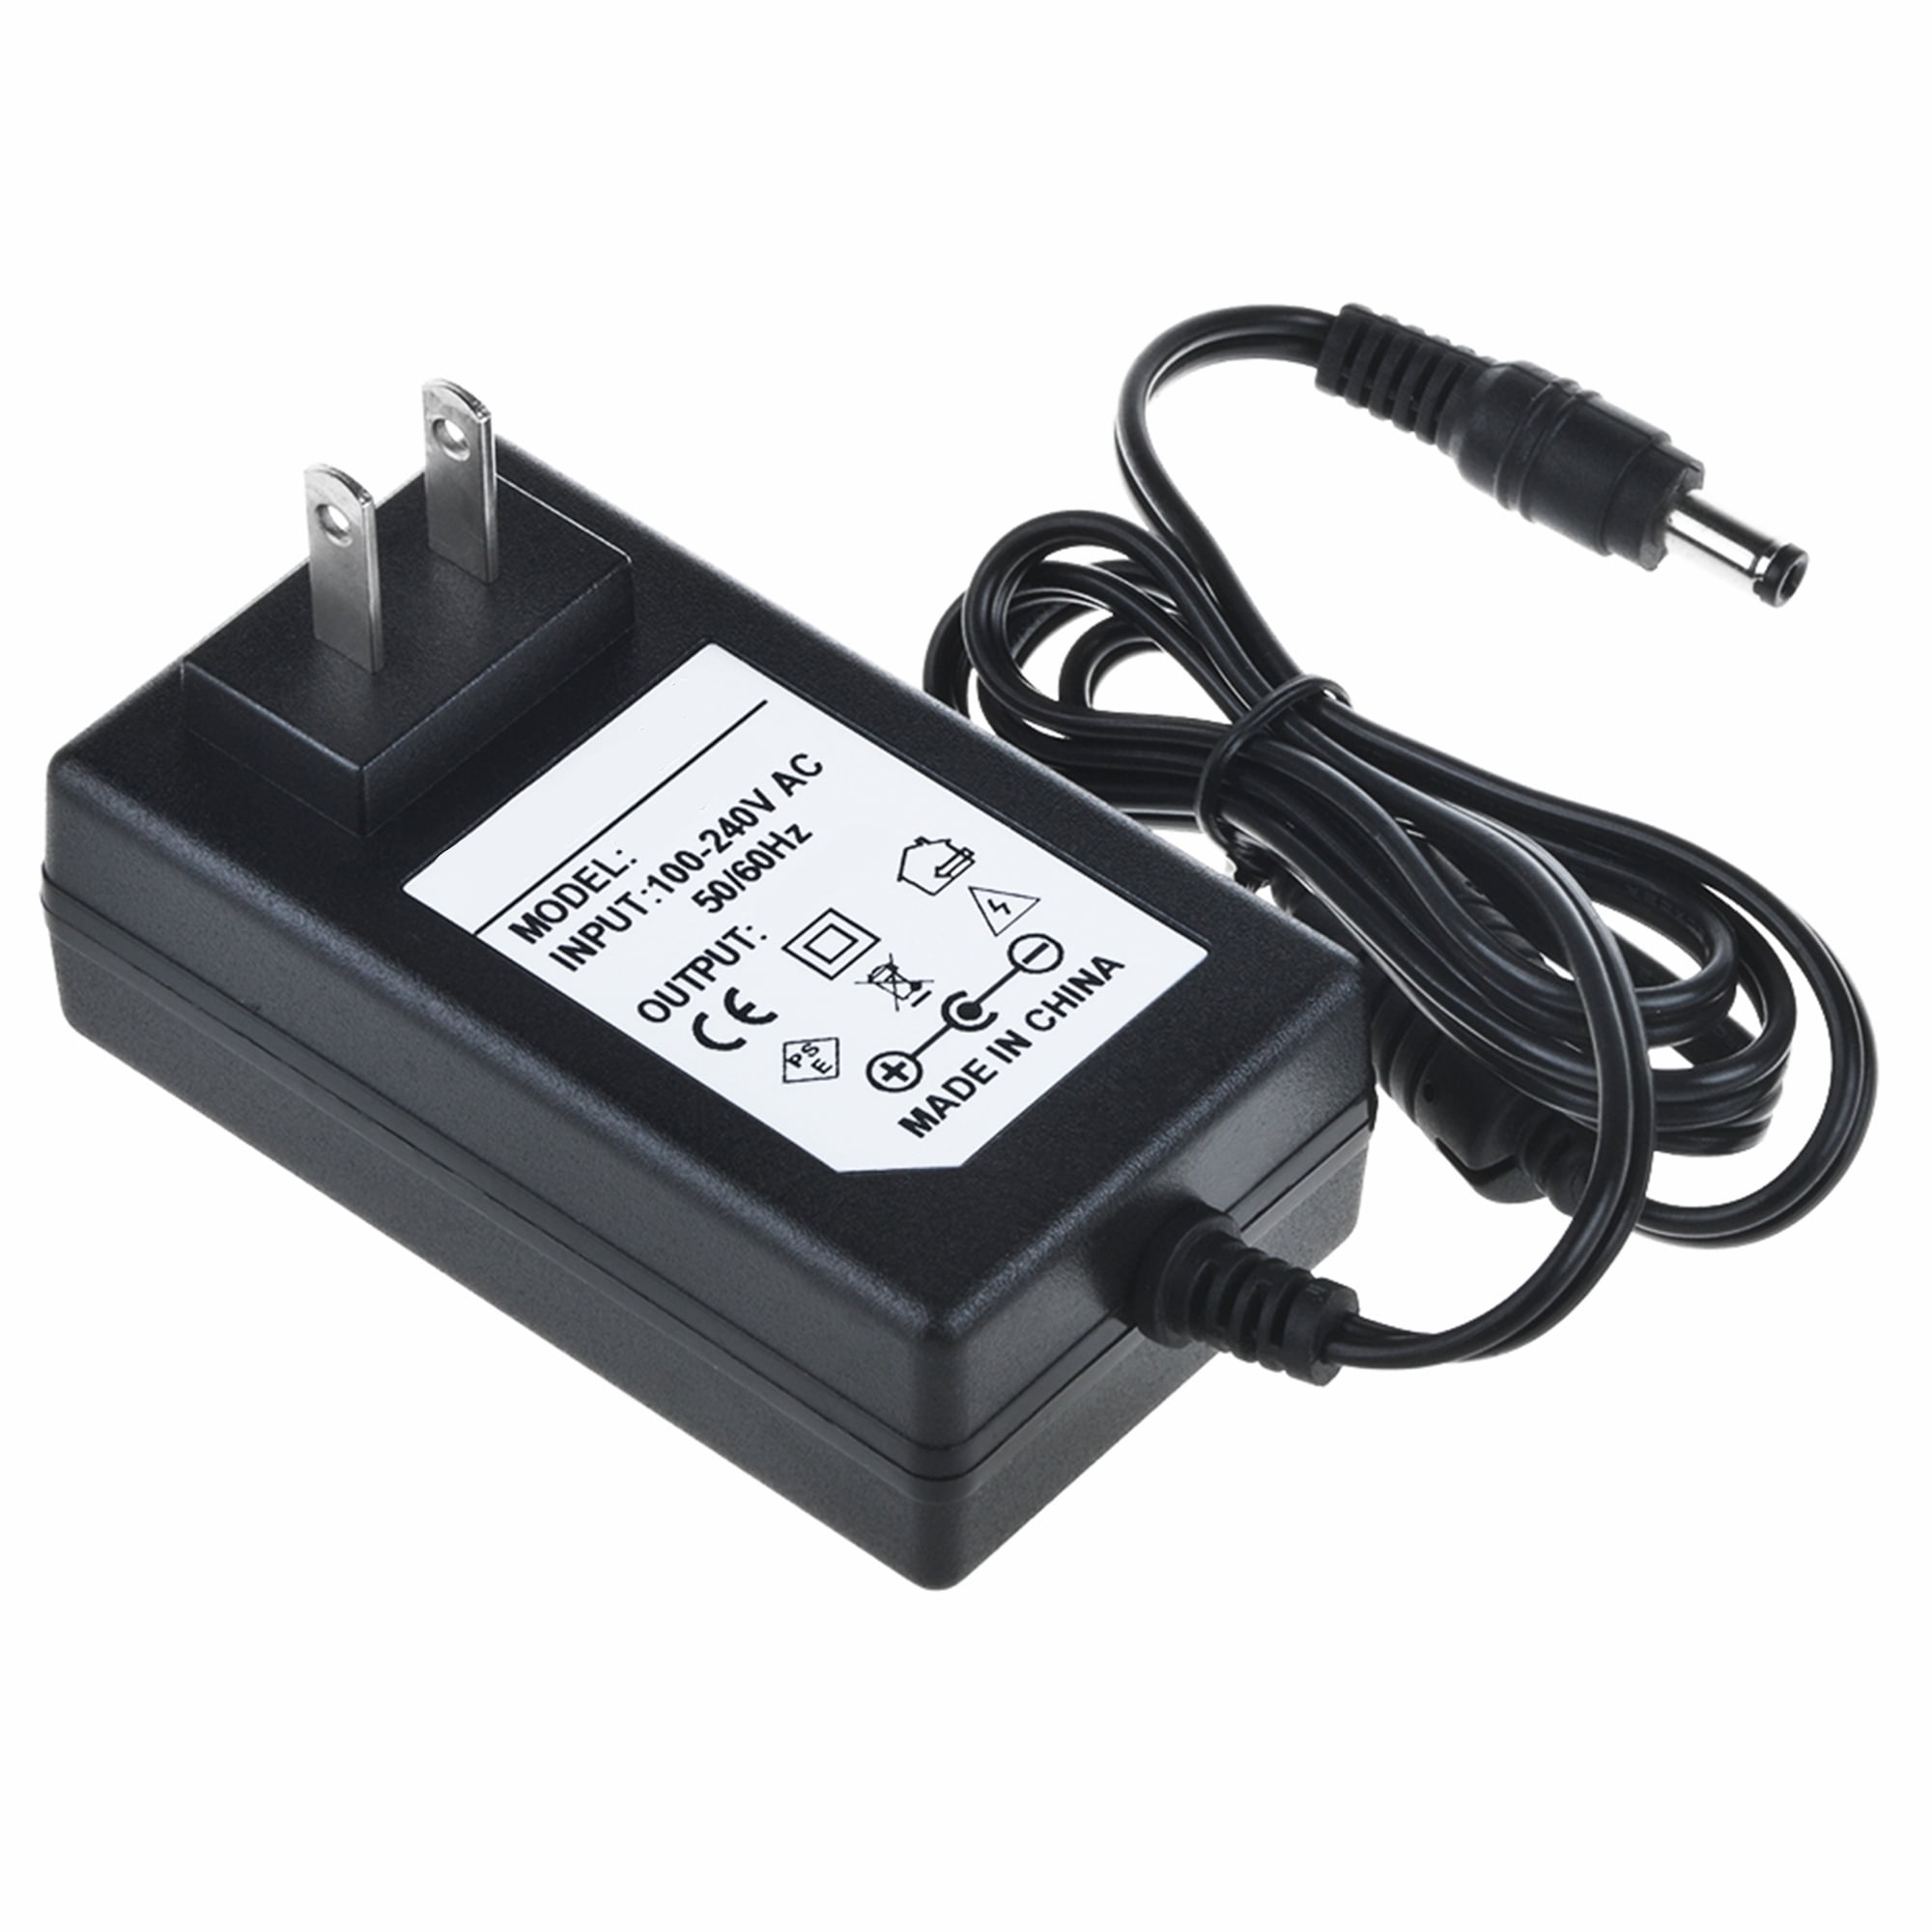 Genuine Samsung PowerBot Vacuum Charger AC/DC Adapter Power Supply SLPS-601FCOT 